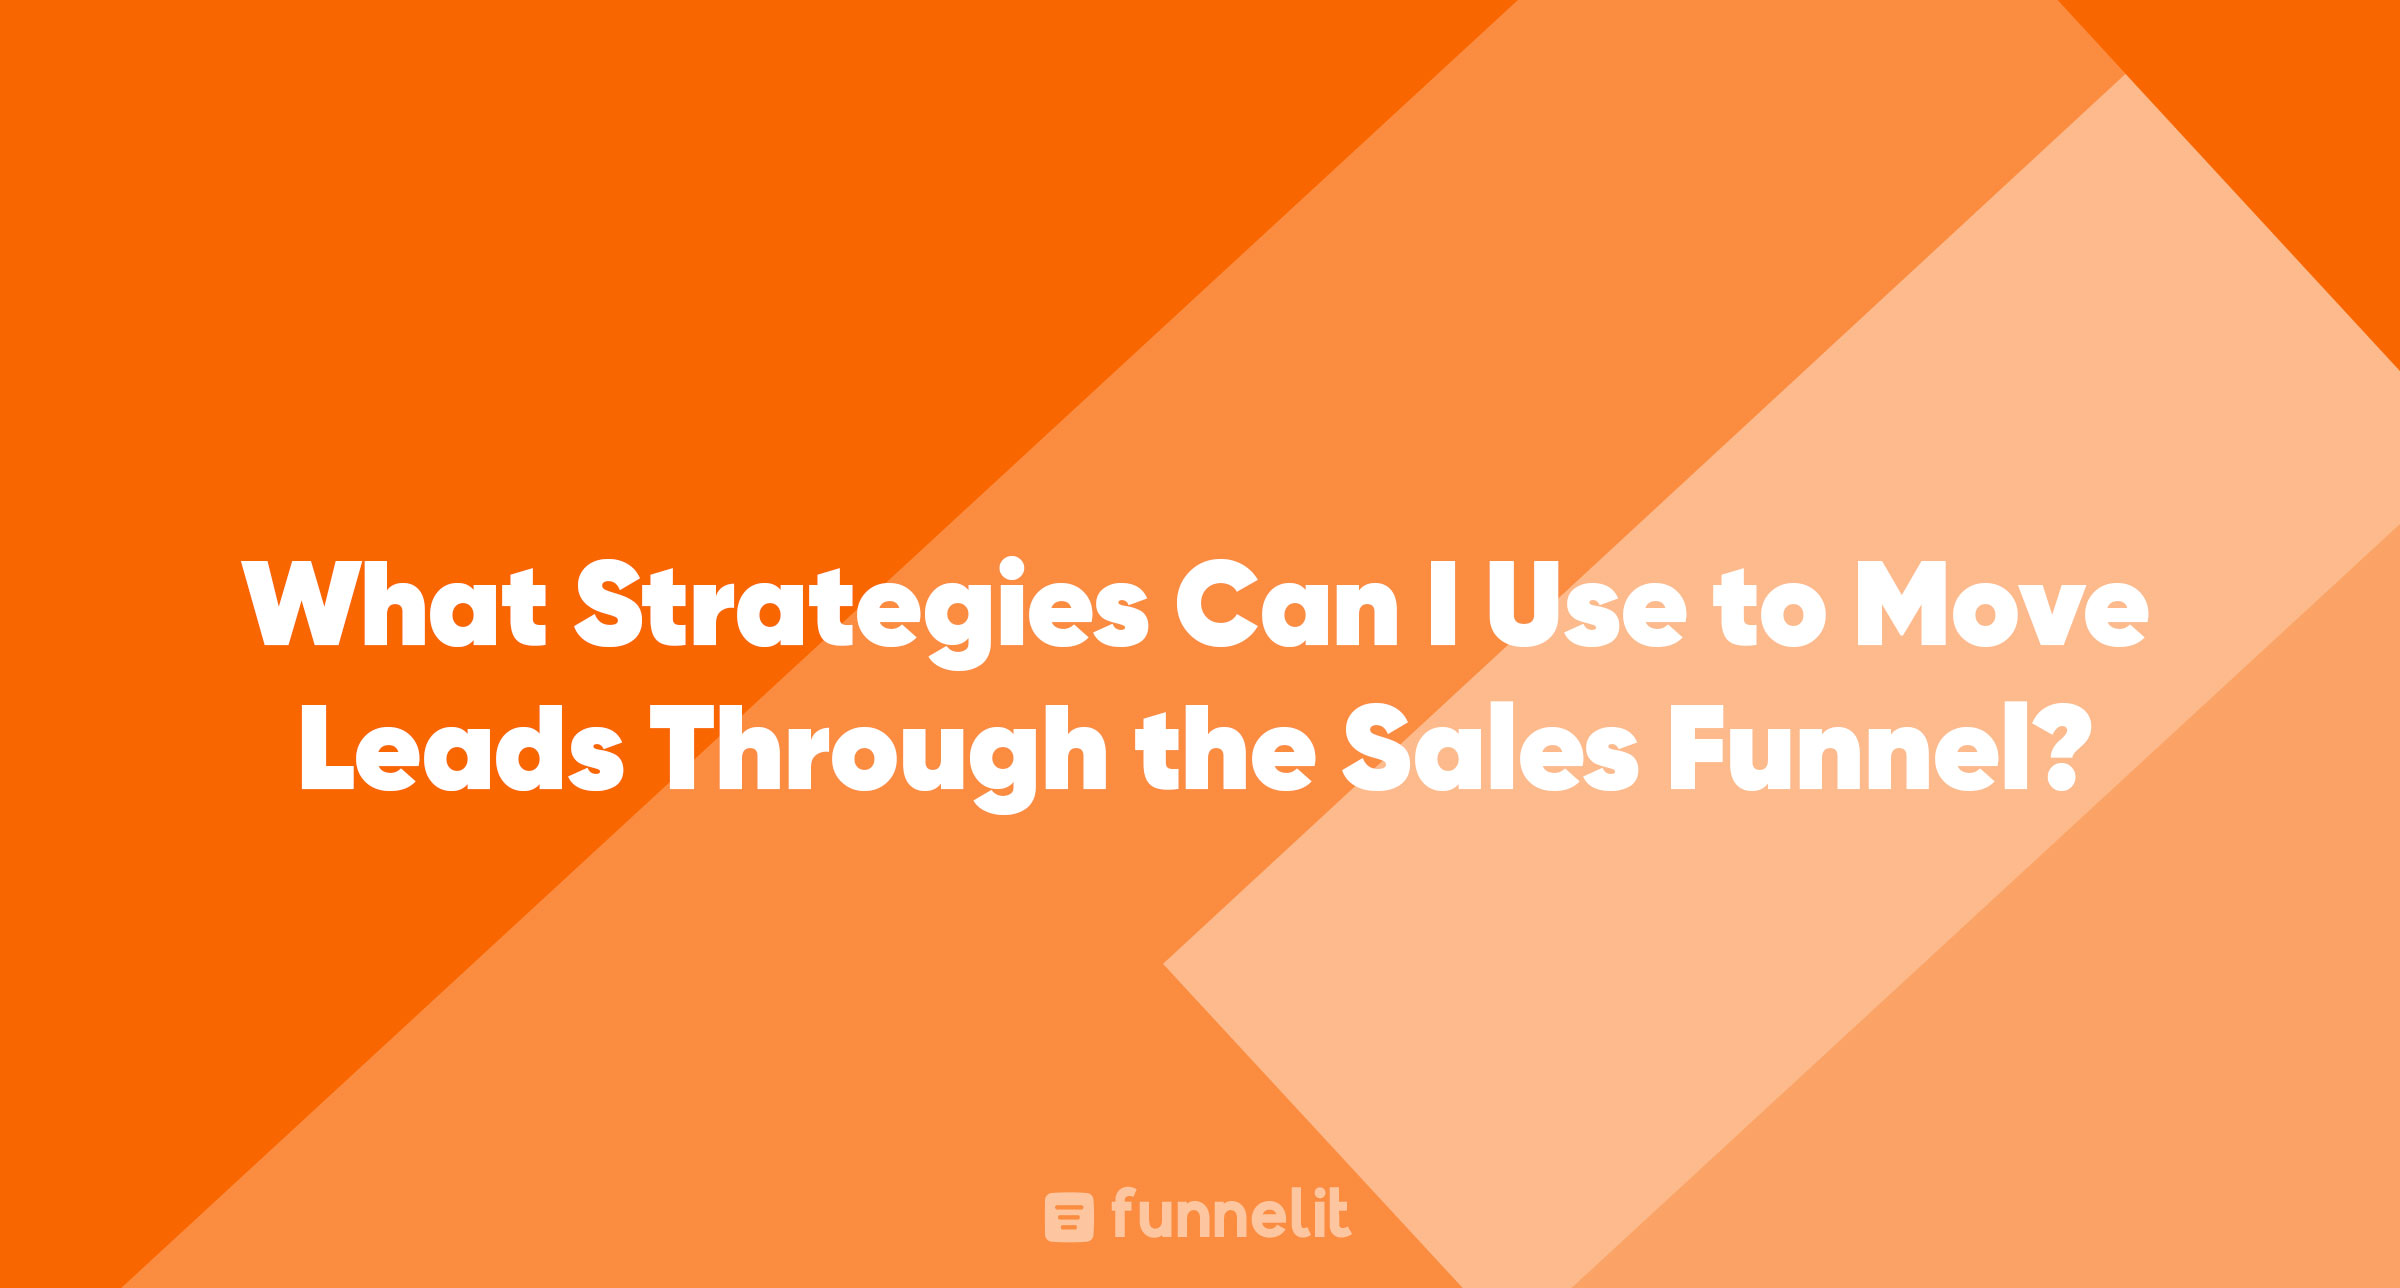 Article | What Strategies Can I Use to Move Leads Through the Sales Funnel?